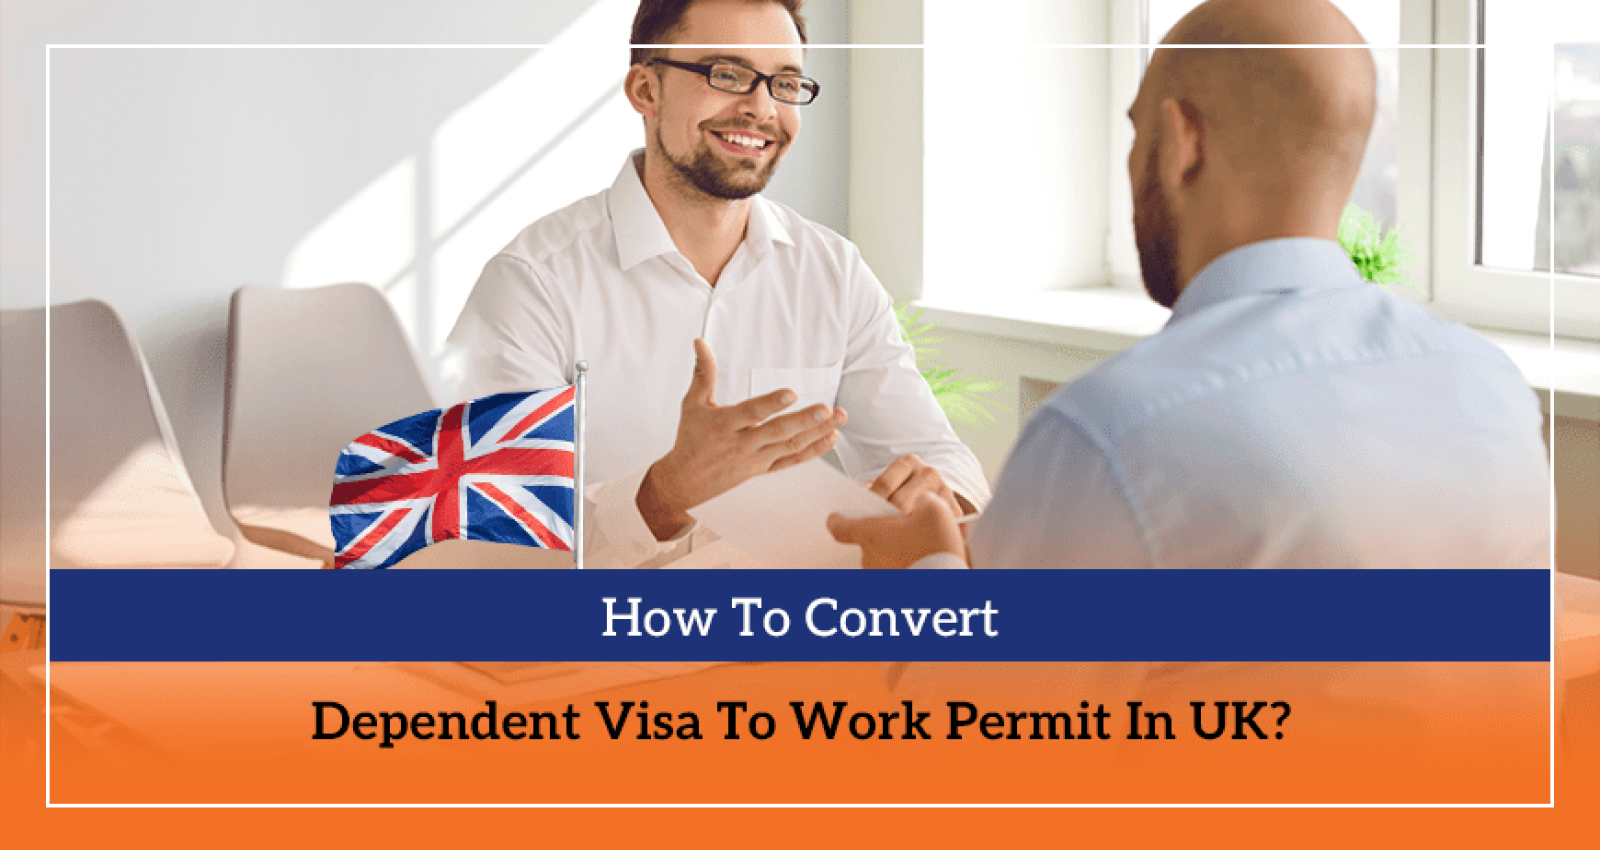 How To Convert Dependent Visa To Work Permit In UK